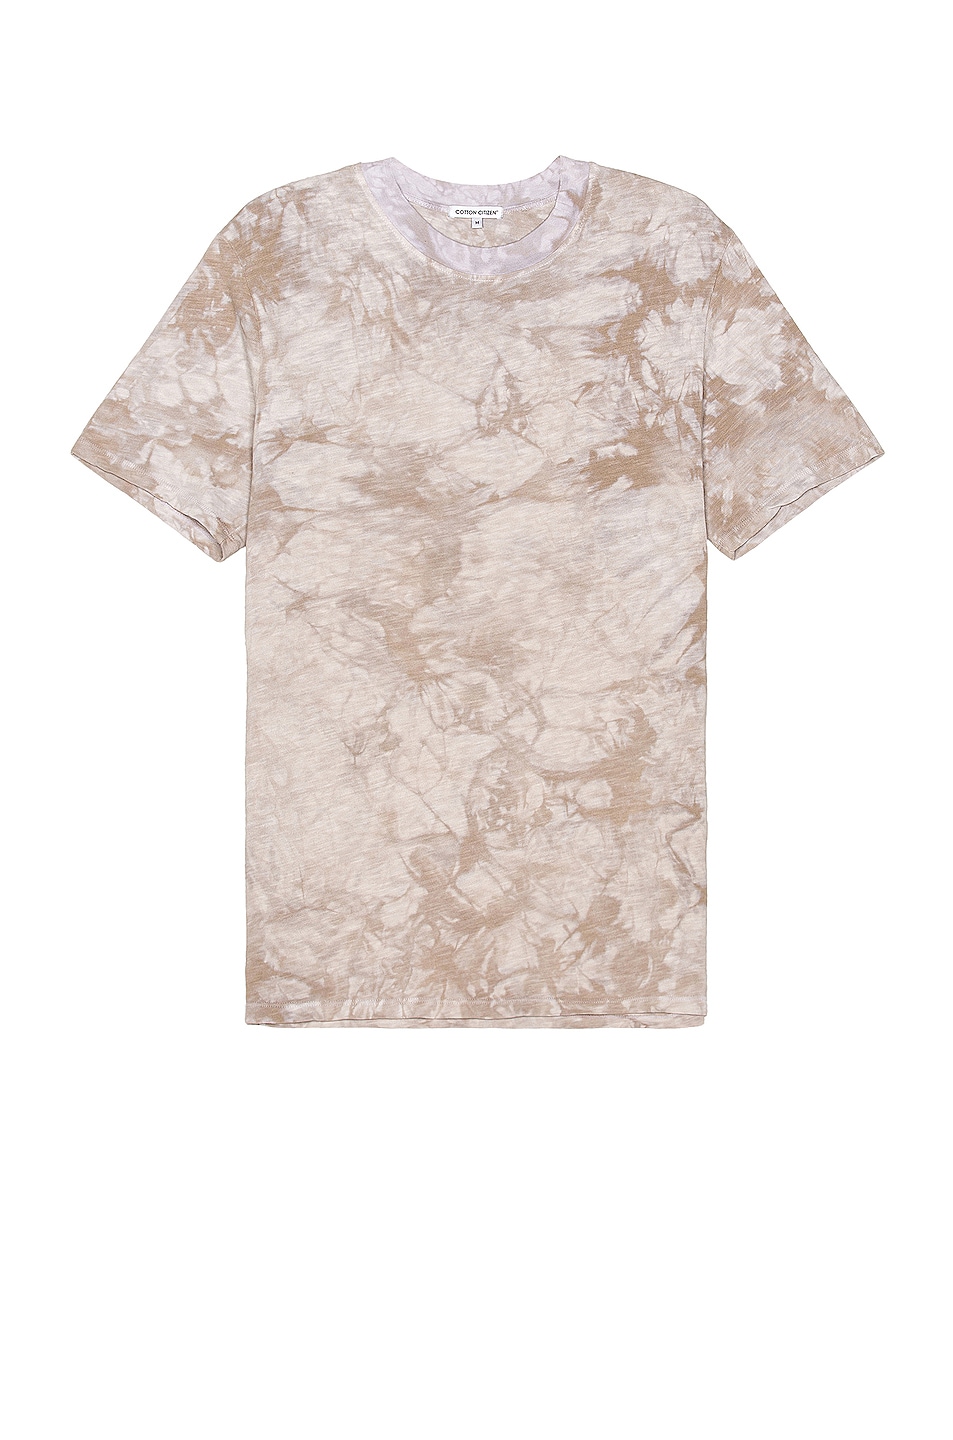 Image 1 of COTTON CITIZEN Presley Tee in White Stone Crystal